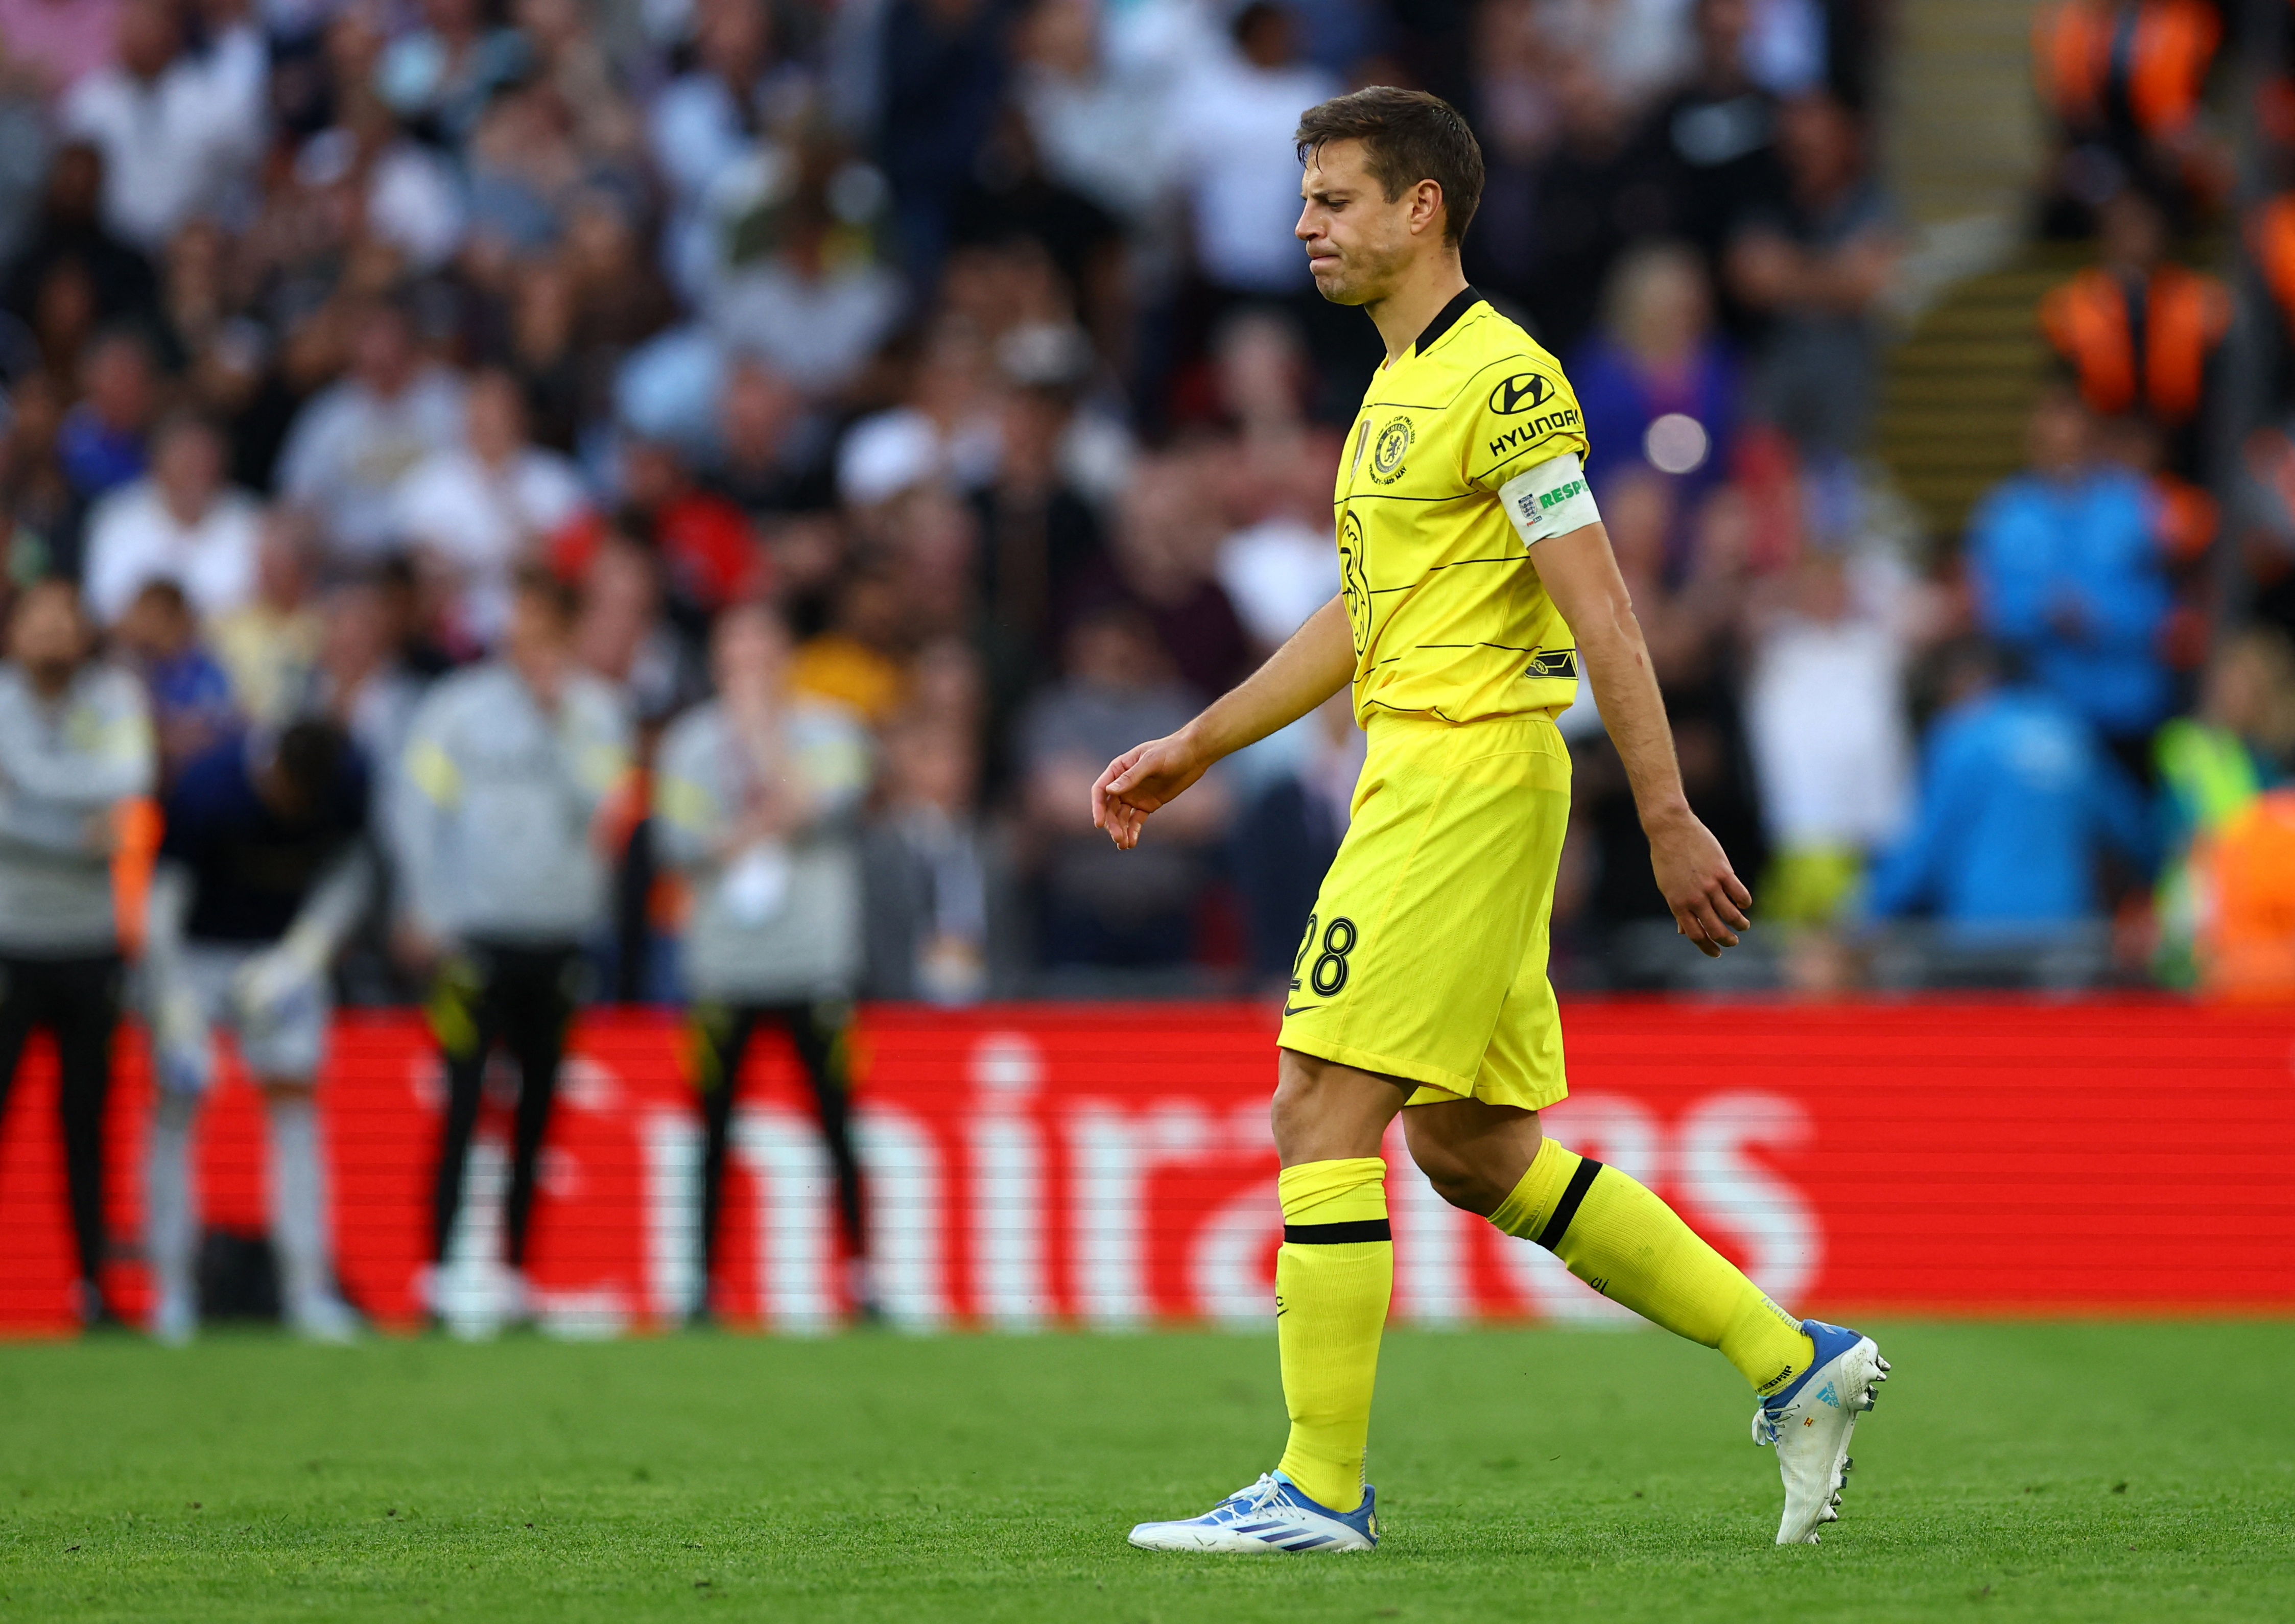 FA Cup final defeat painful, says Chelsea's Azpilicueta after penalty miss | Reuters